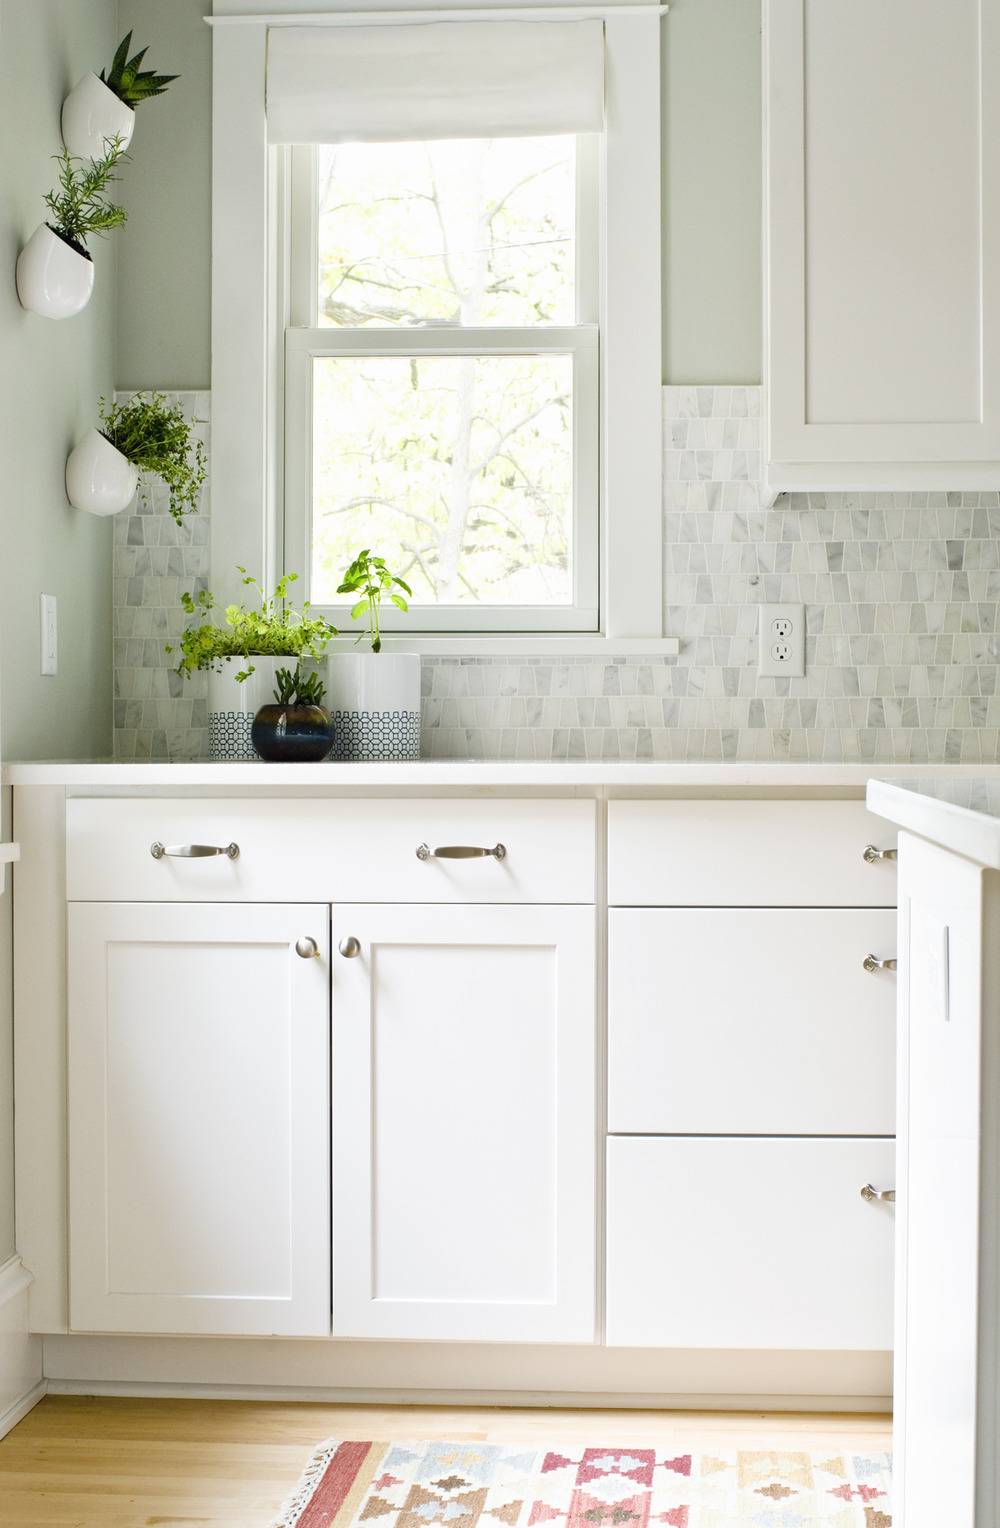 A kitchen having white cabinets and few vases near the window with green plants in them.